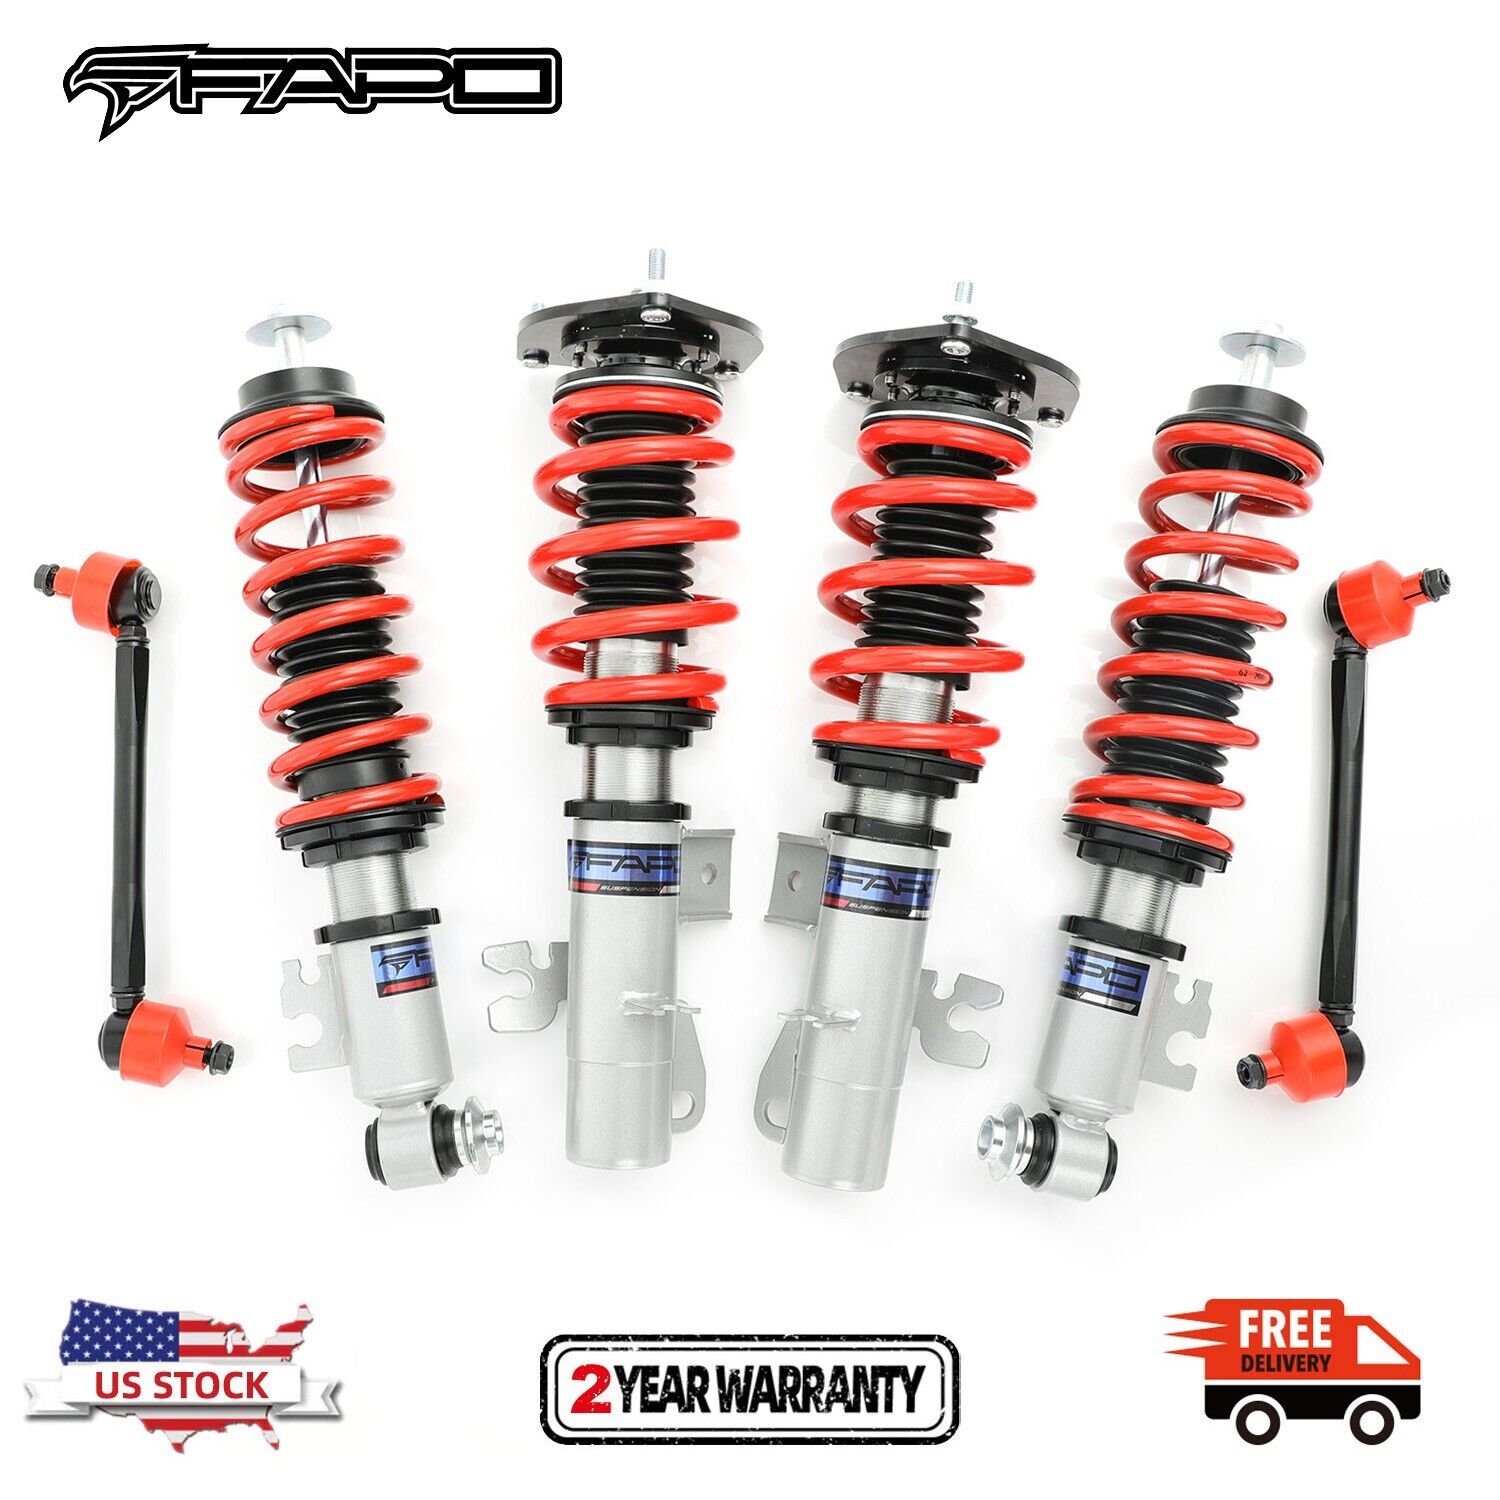 FAPO Coilovers kits for Mini Cooper/Hatch 2nd Gen 06-13 Adj Height